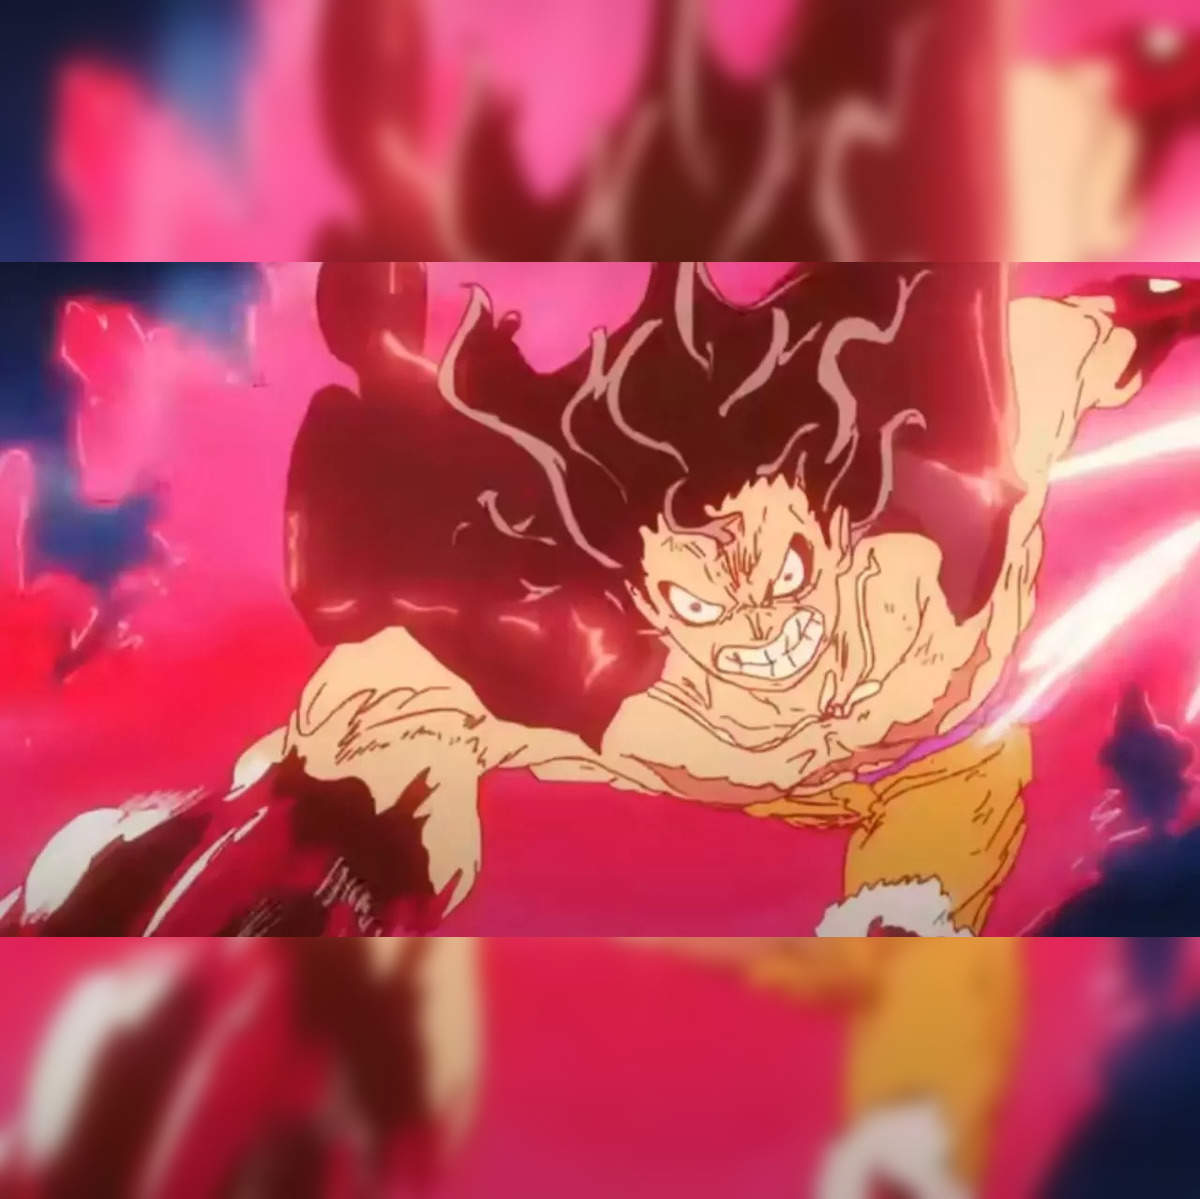 One Piece Anime: All the times when Luffy Gear 5 may have been